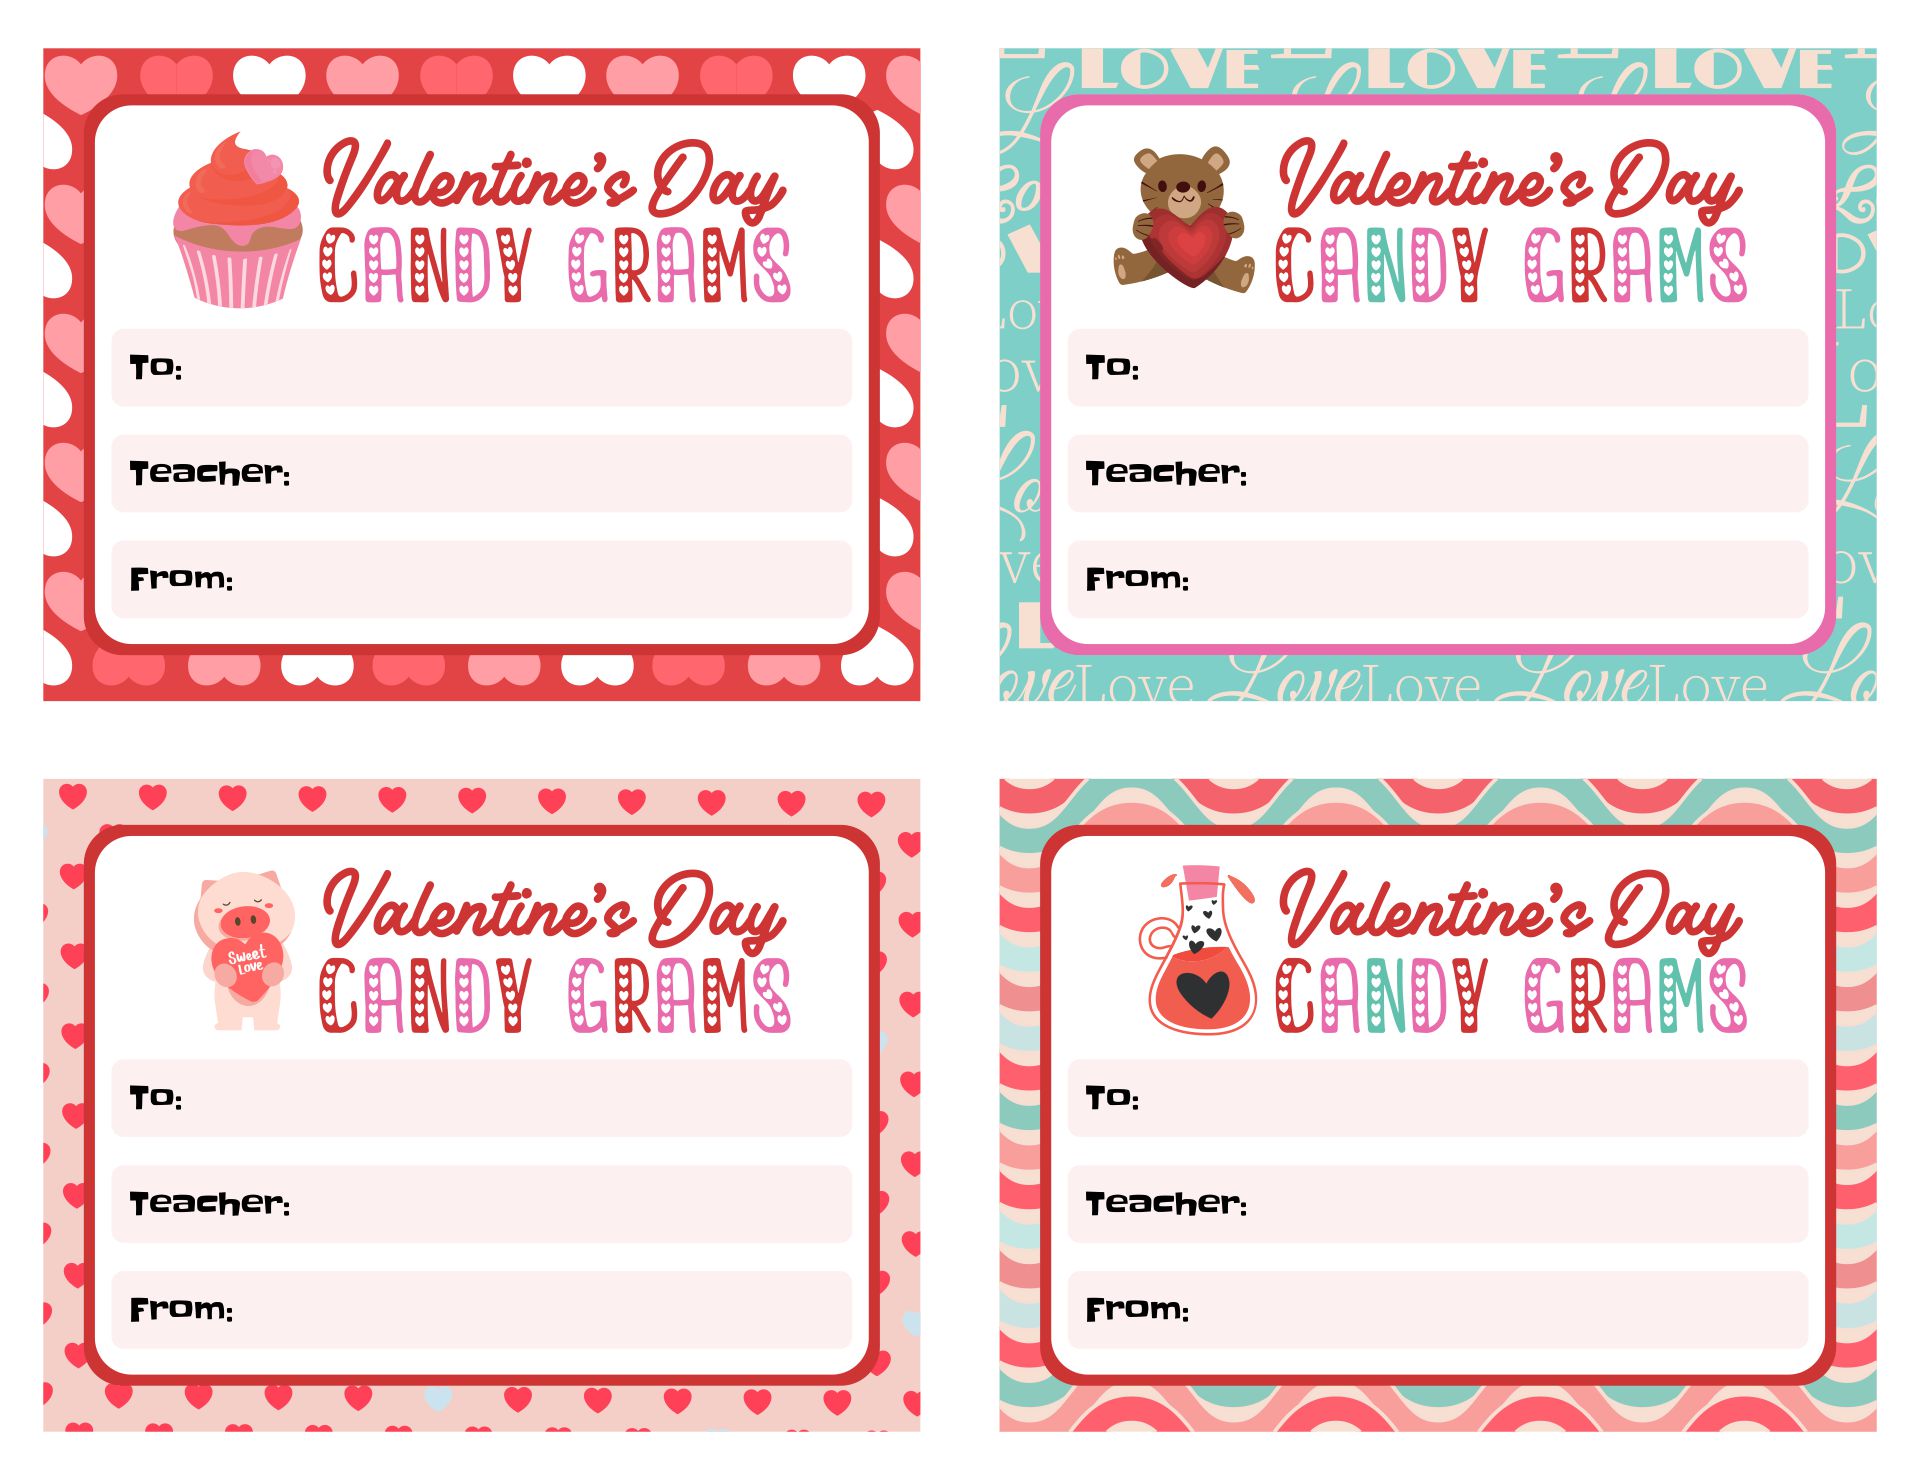 8-best-images-of-printable-valentine-s-candy-grams-printable